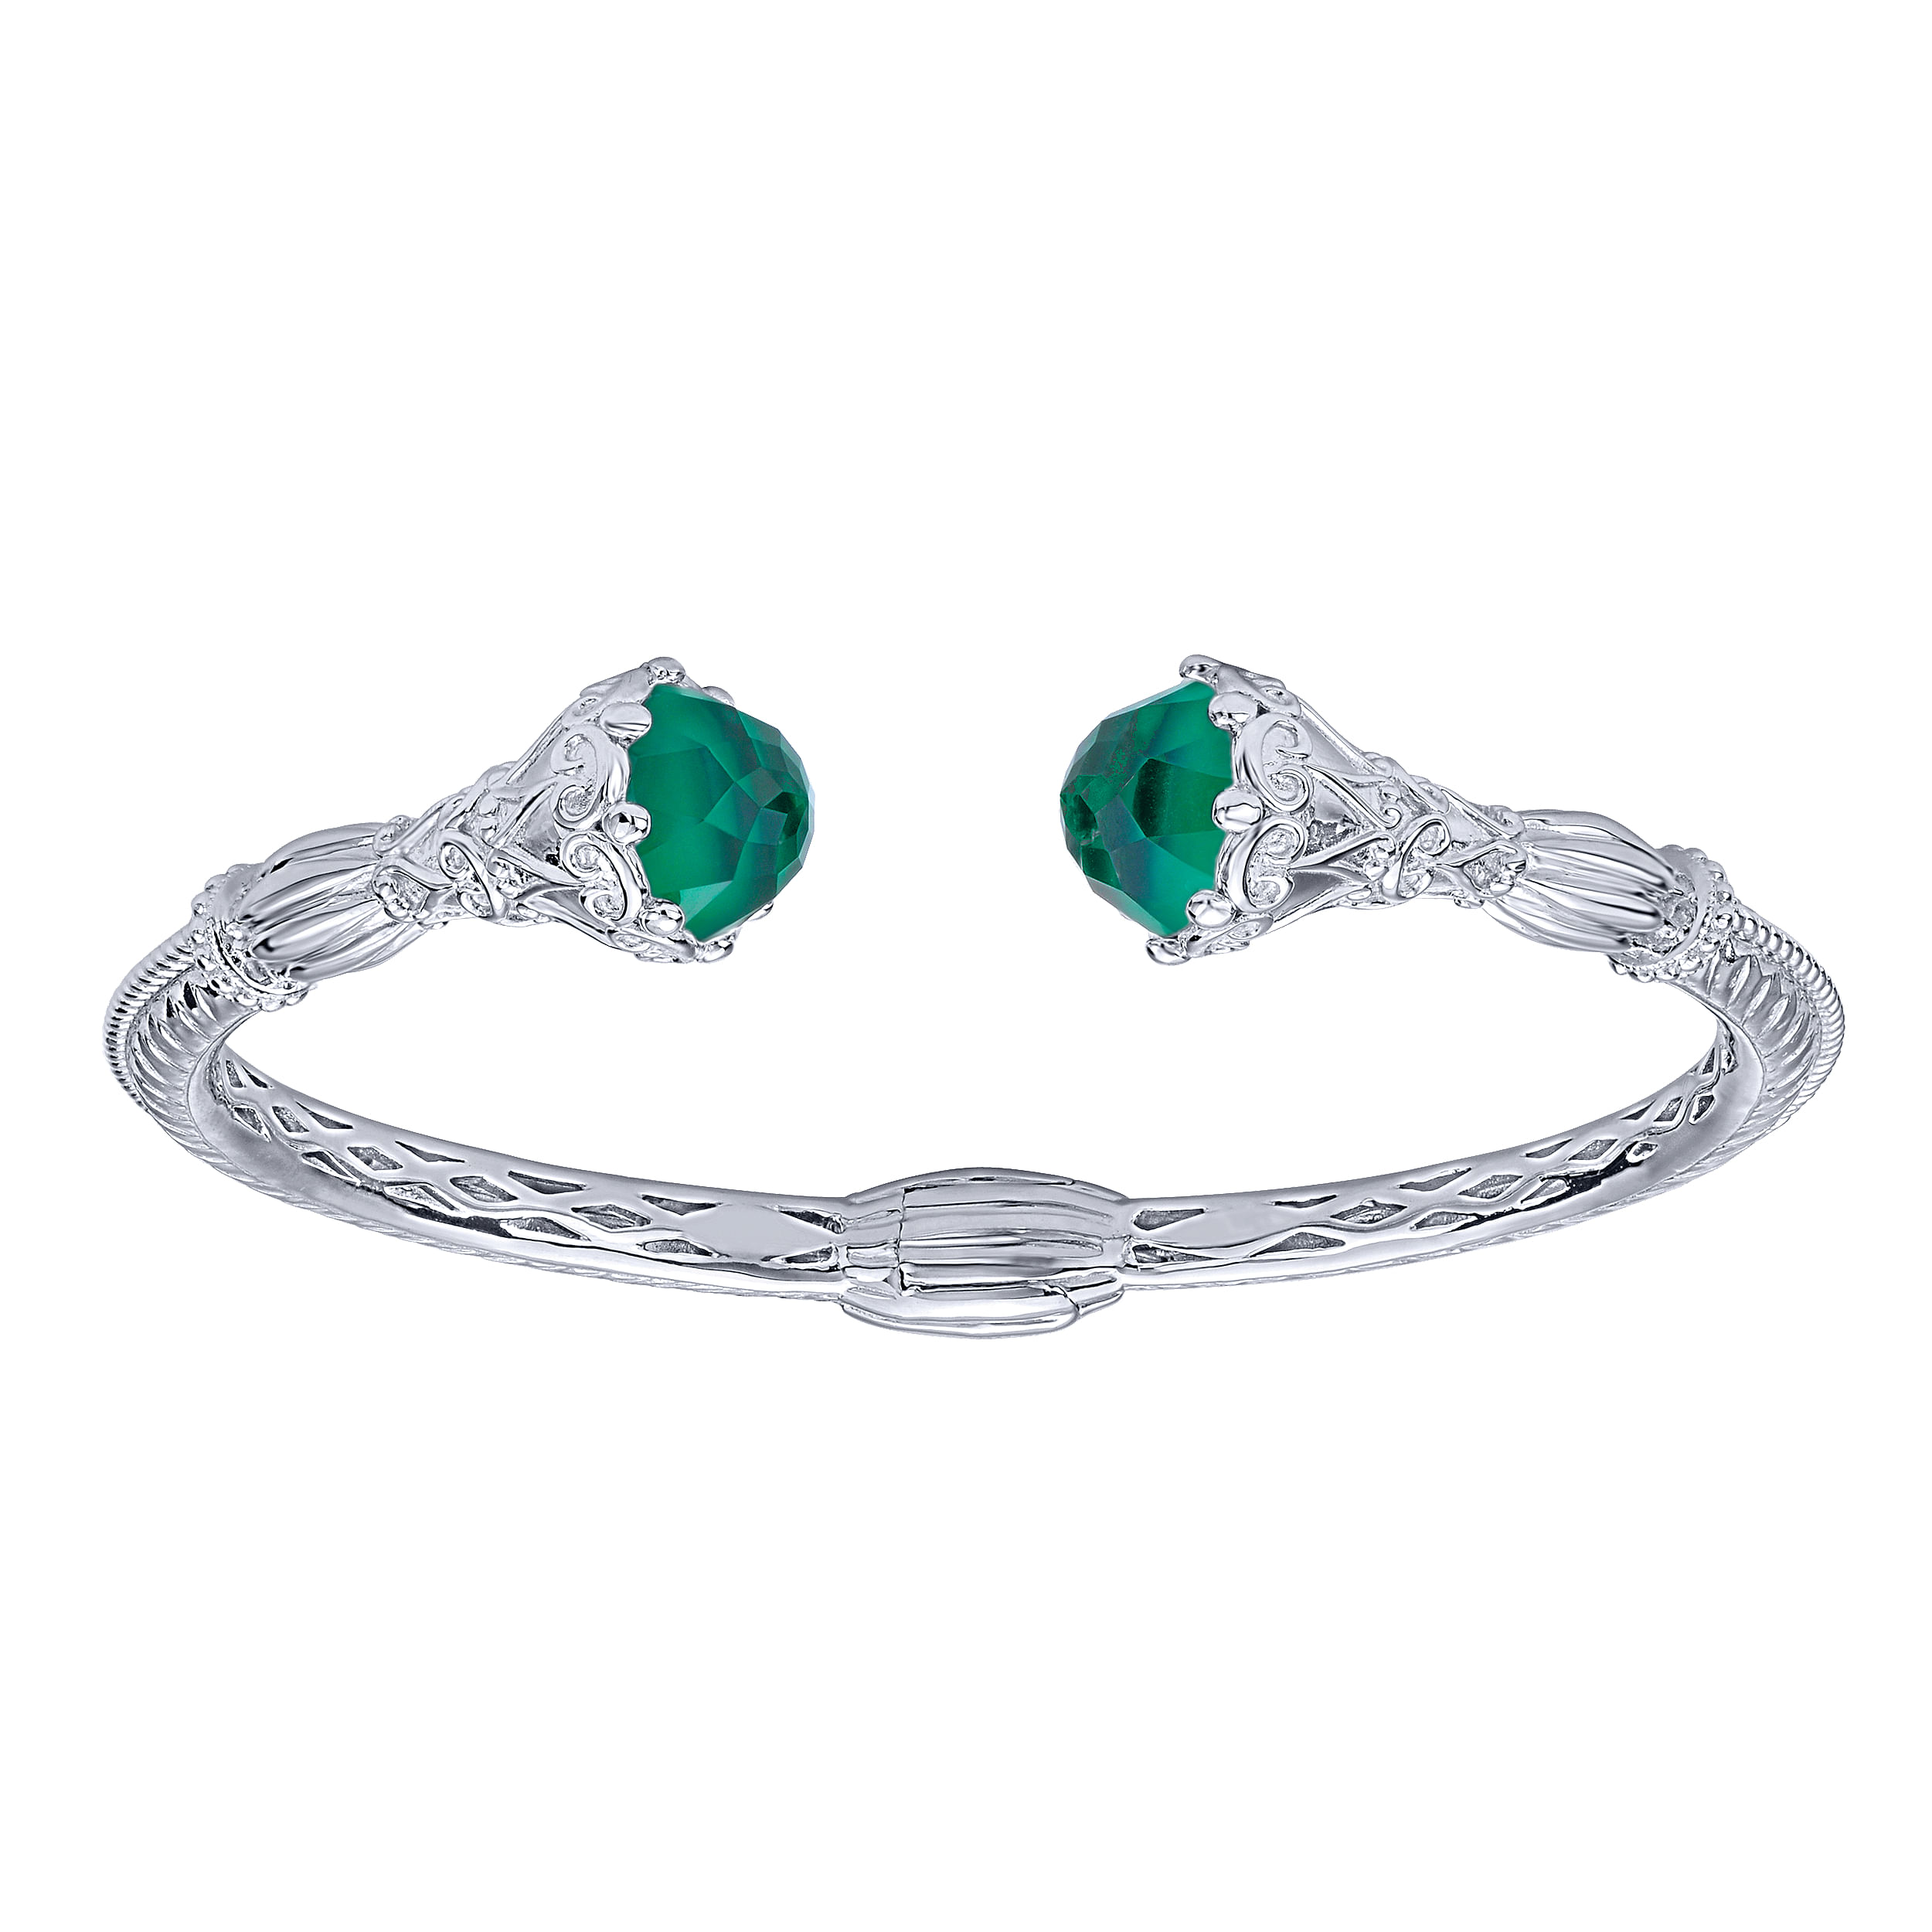 925 Silver and Stainless Steel Rock Crystal and Green Onyx Open Bangle